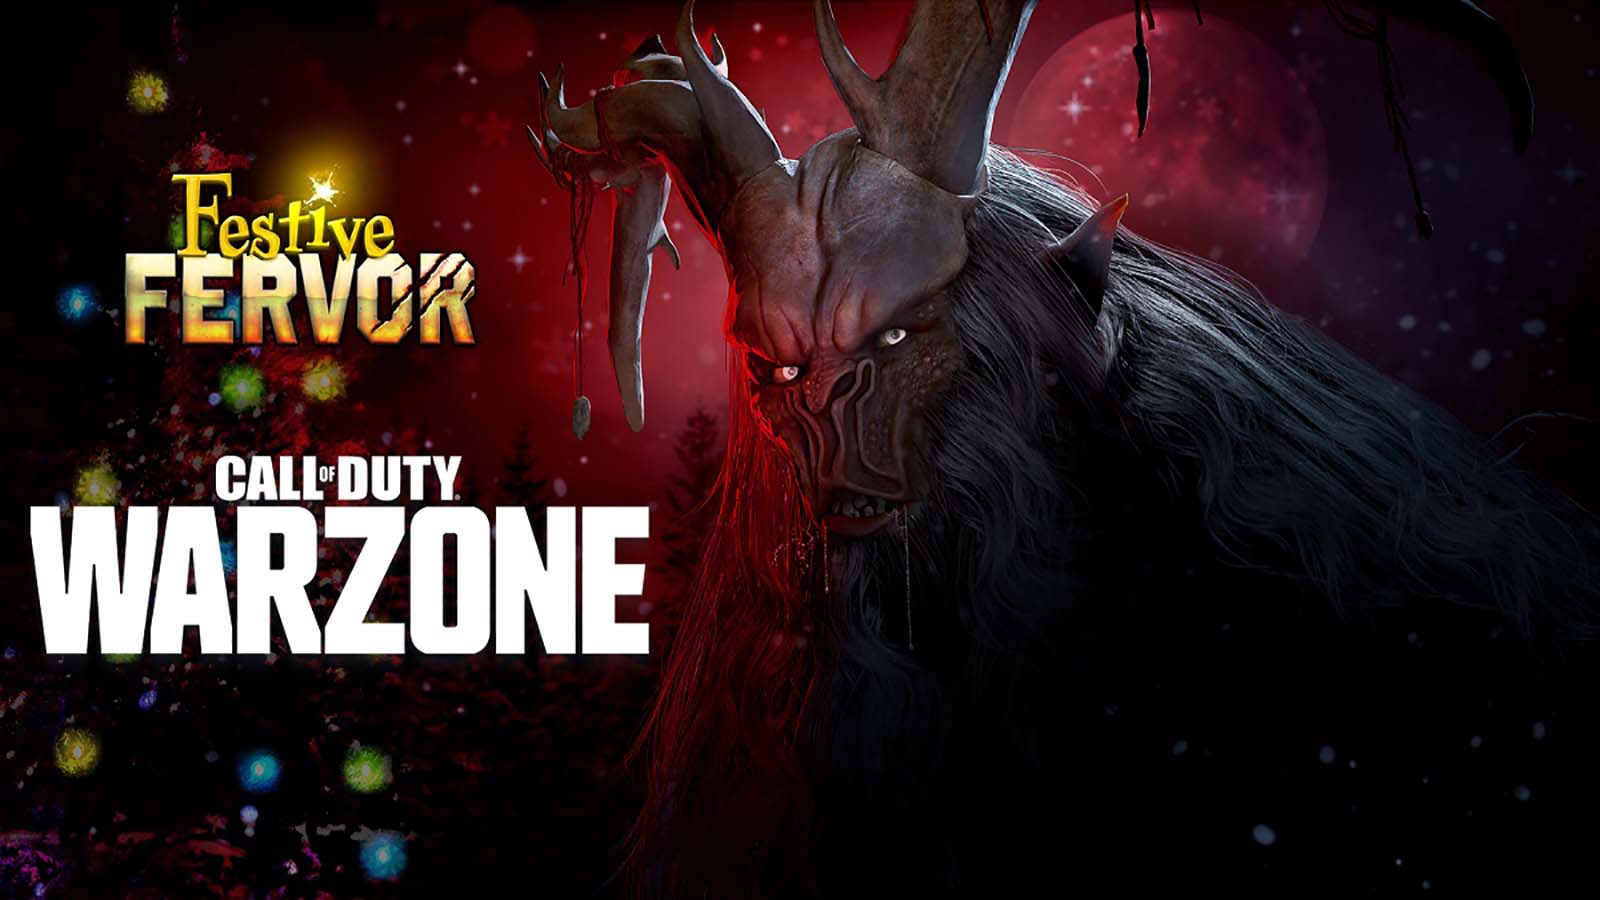 Image for Krampus is causing havoc in Warzone, and the community is torn.